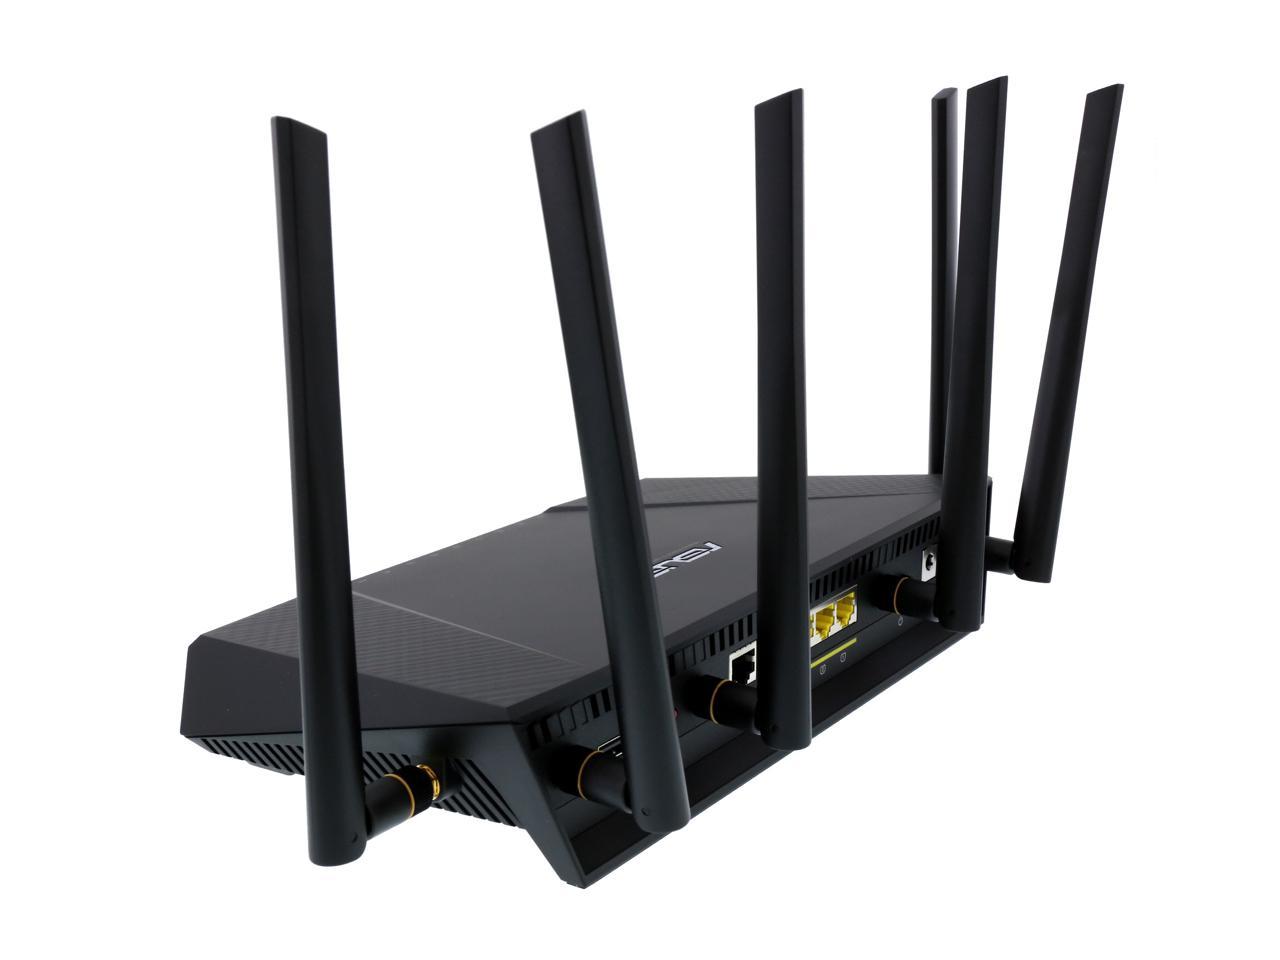 Jeg vil have malm Analytiker ASUS AC3200 Tri-Band Gigabit Wi-Fi Router, AiProtection Lifetime Security  by Trend Micro, Adaptive QoS, Parental Control - Newegg.com